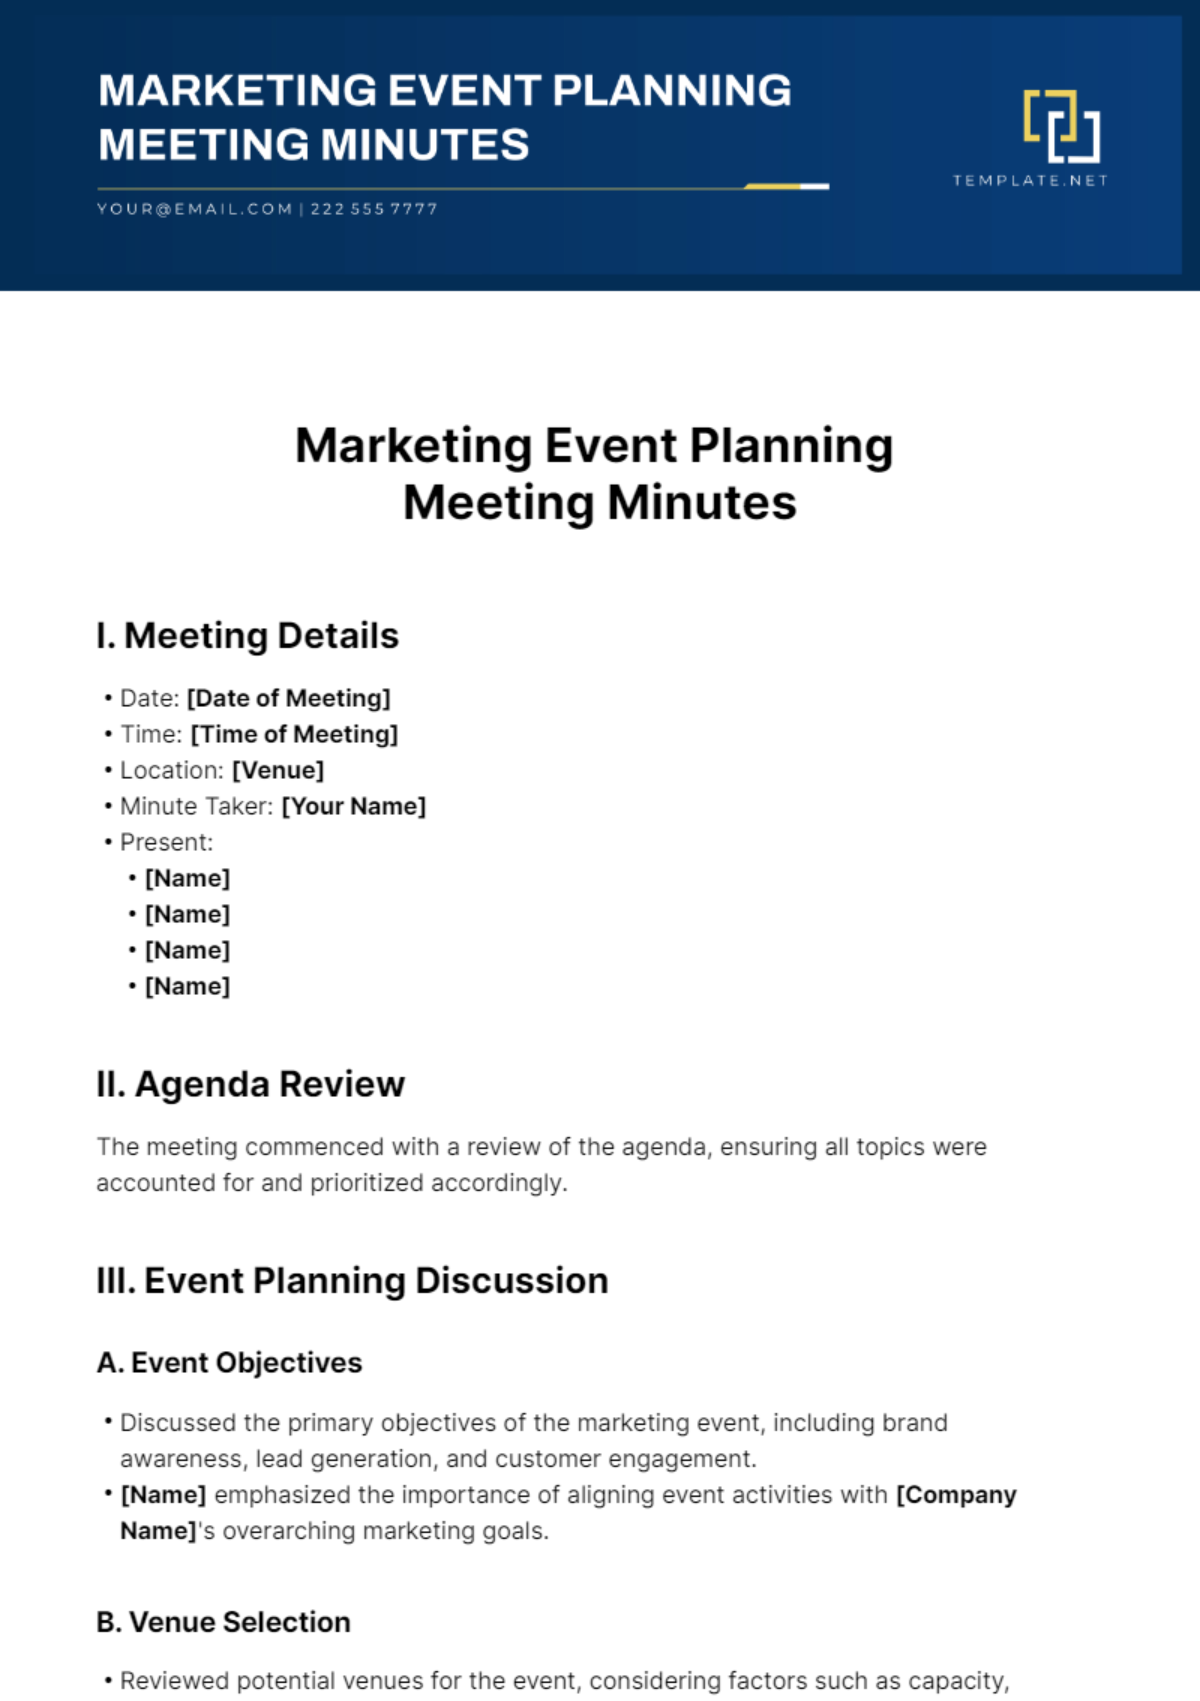 Marketing Event Planning Meeting Minutes Template